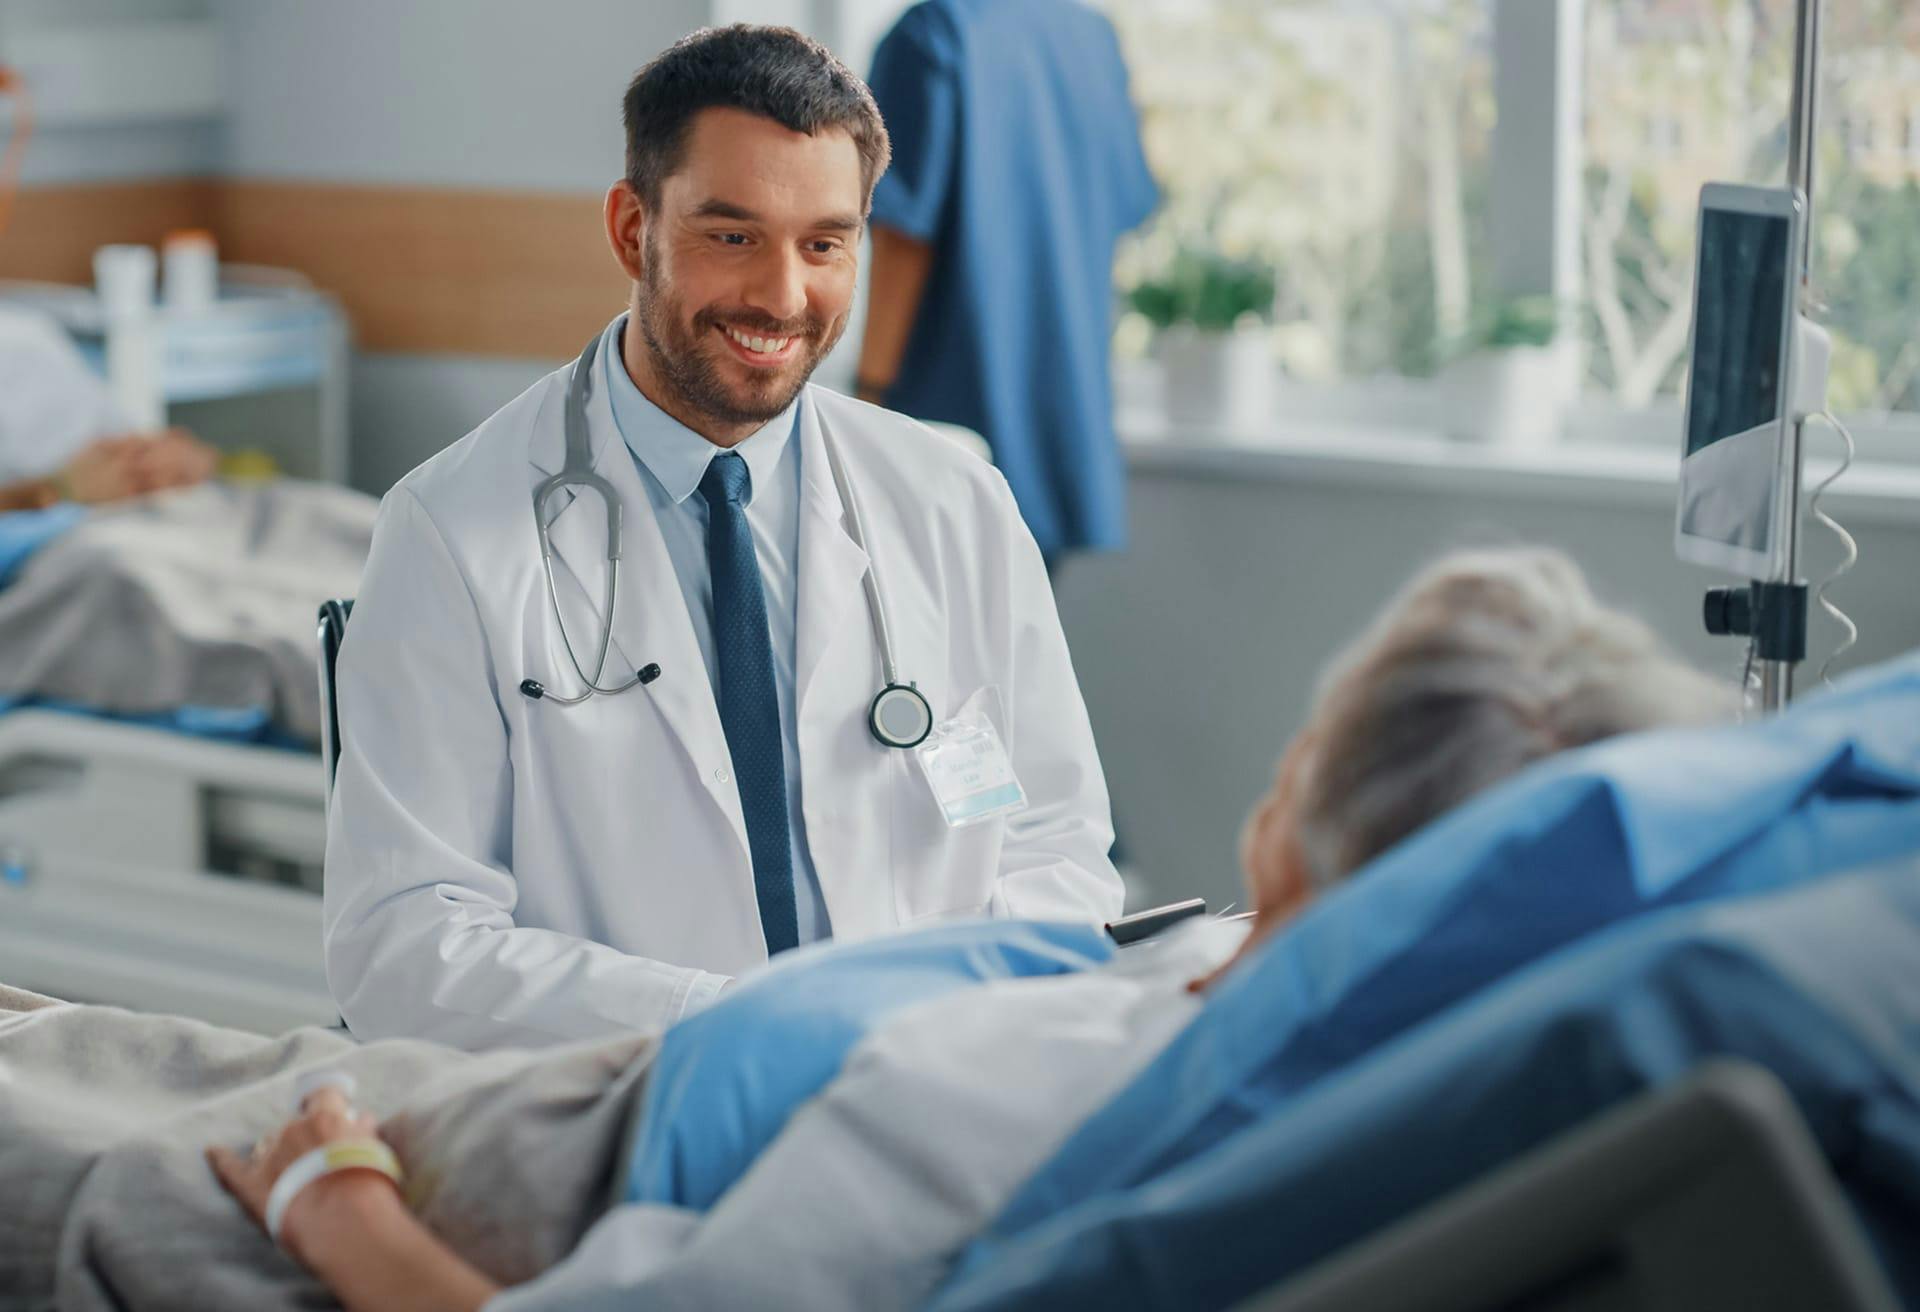 Doctor smiling and speaking with patient